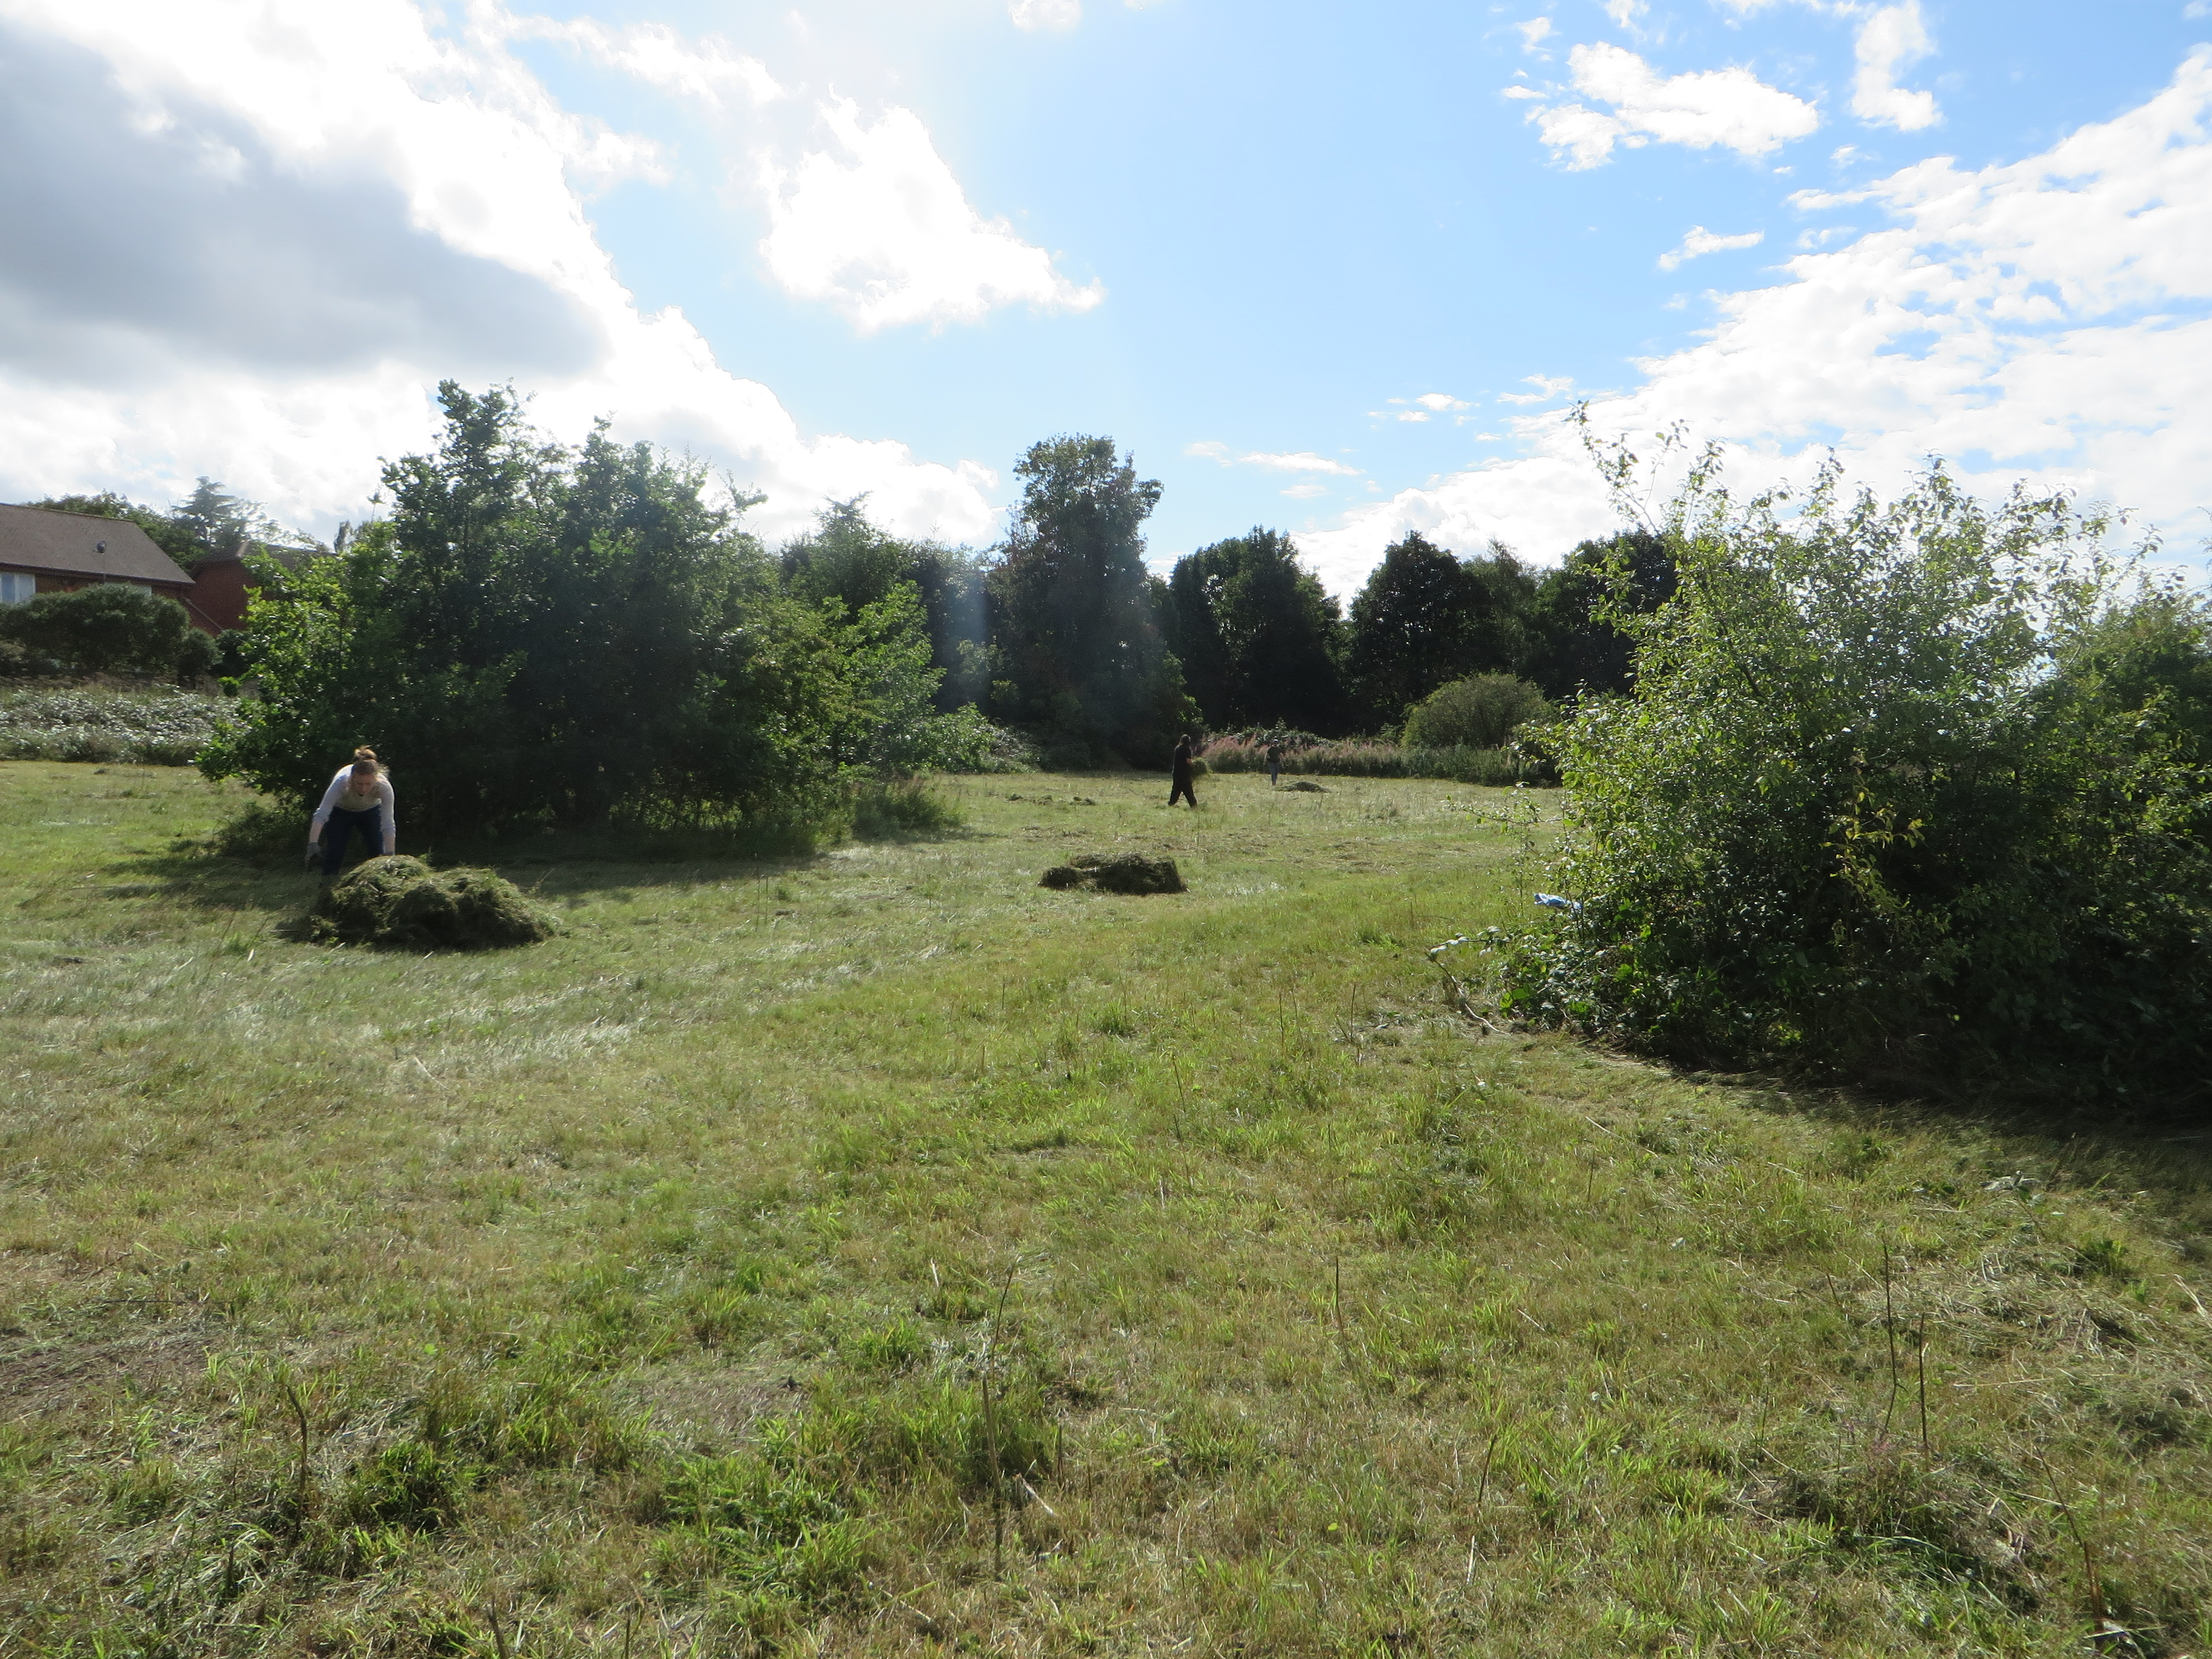 The 'receptor' site with piles of 'green hay' ready for scattering. 